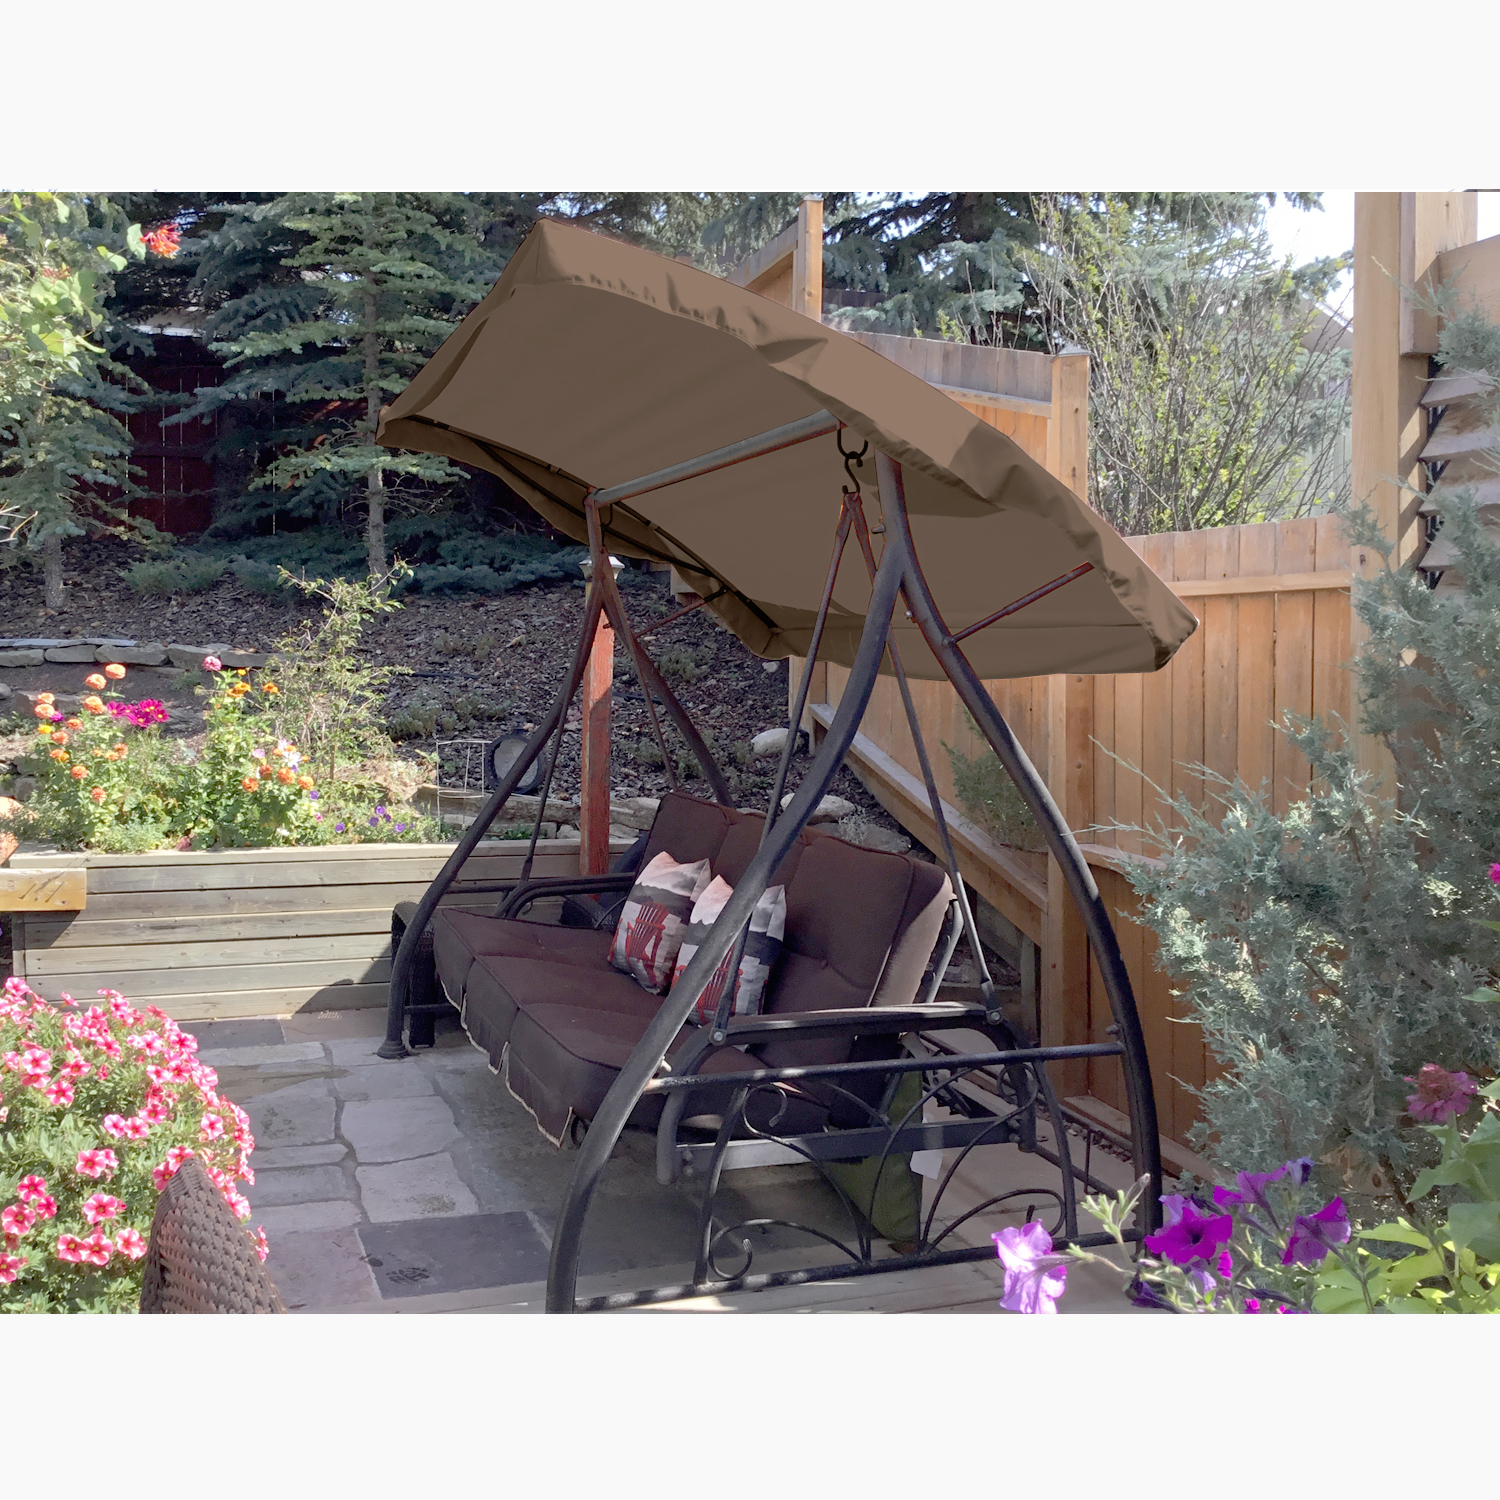 Replacement Canopy for Costco Round Side Table Swing - Nutmeg